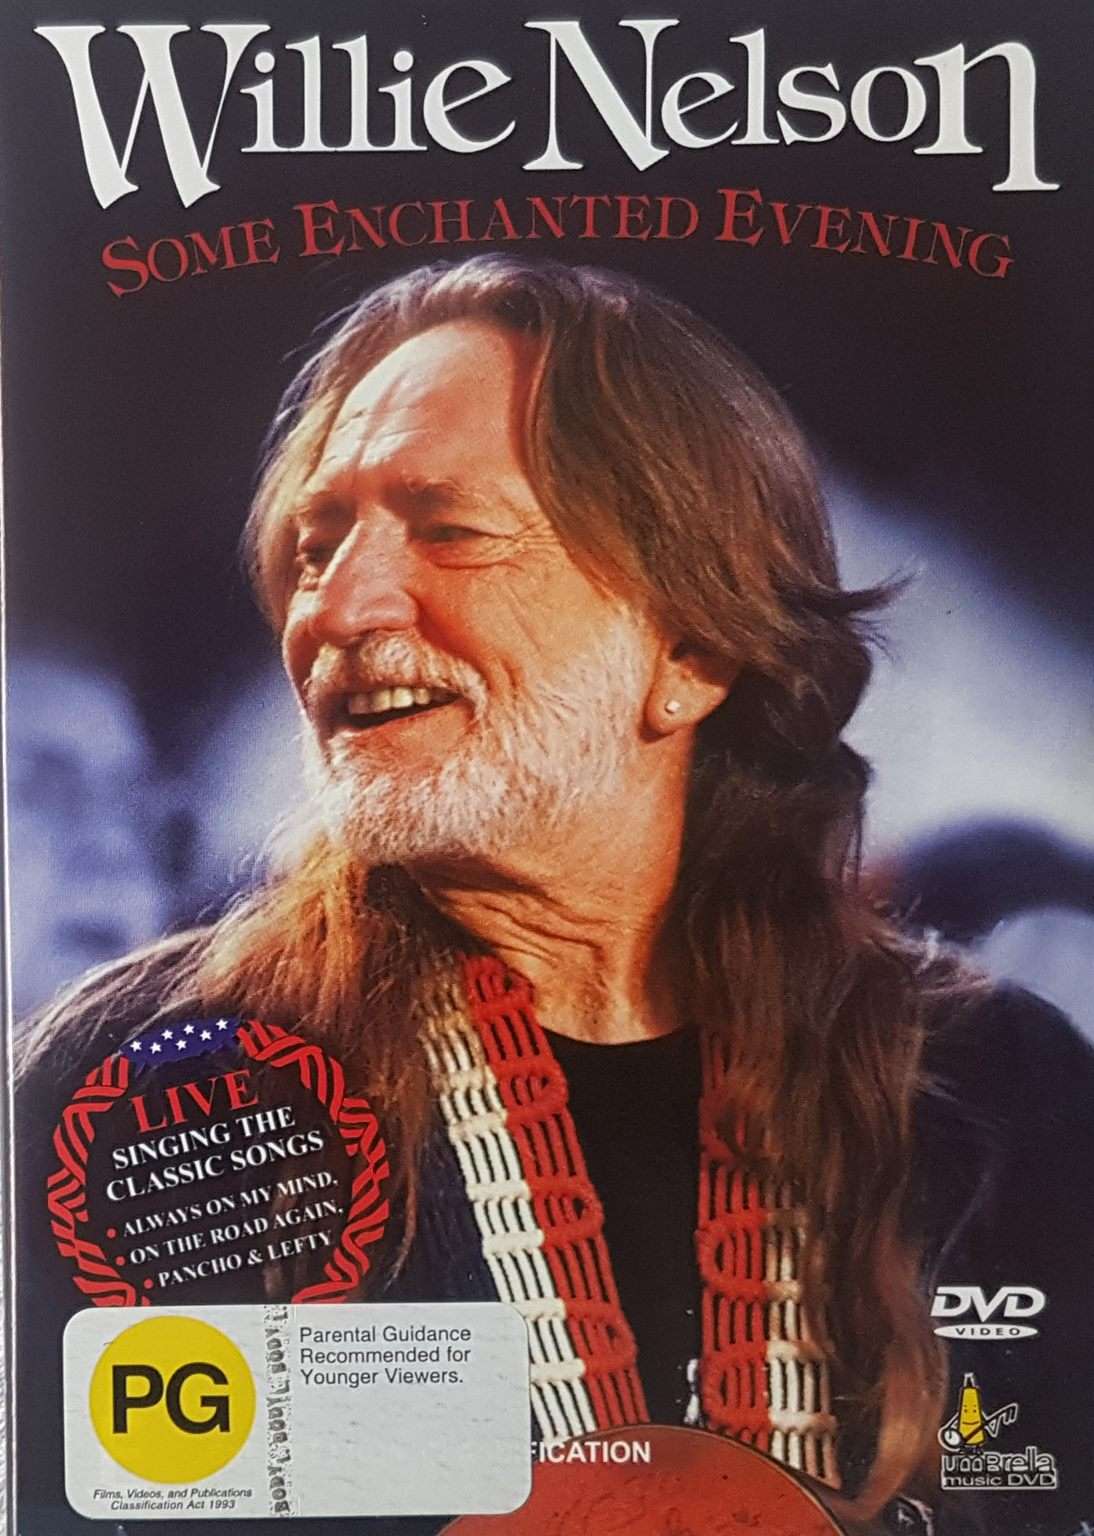 Willie Nelson: Some Enchanted Evening